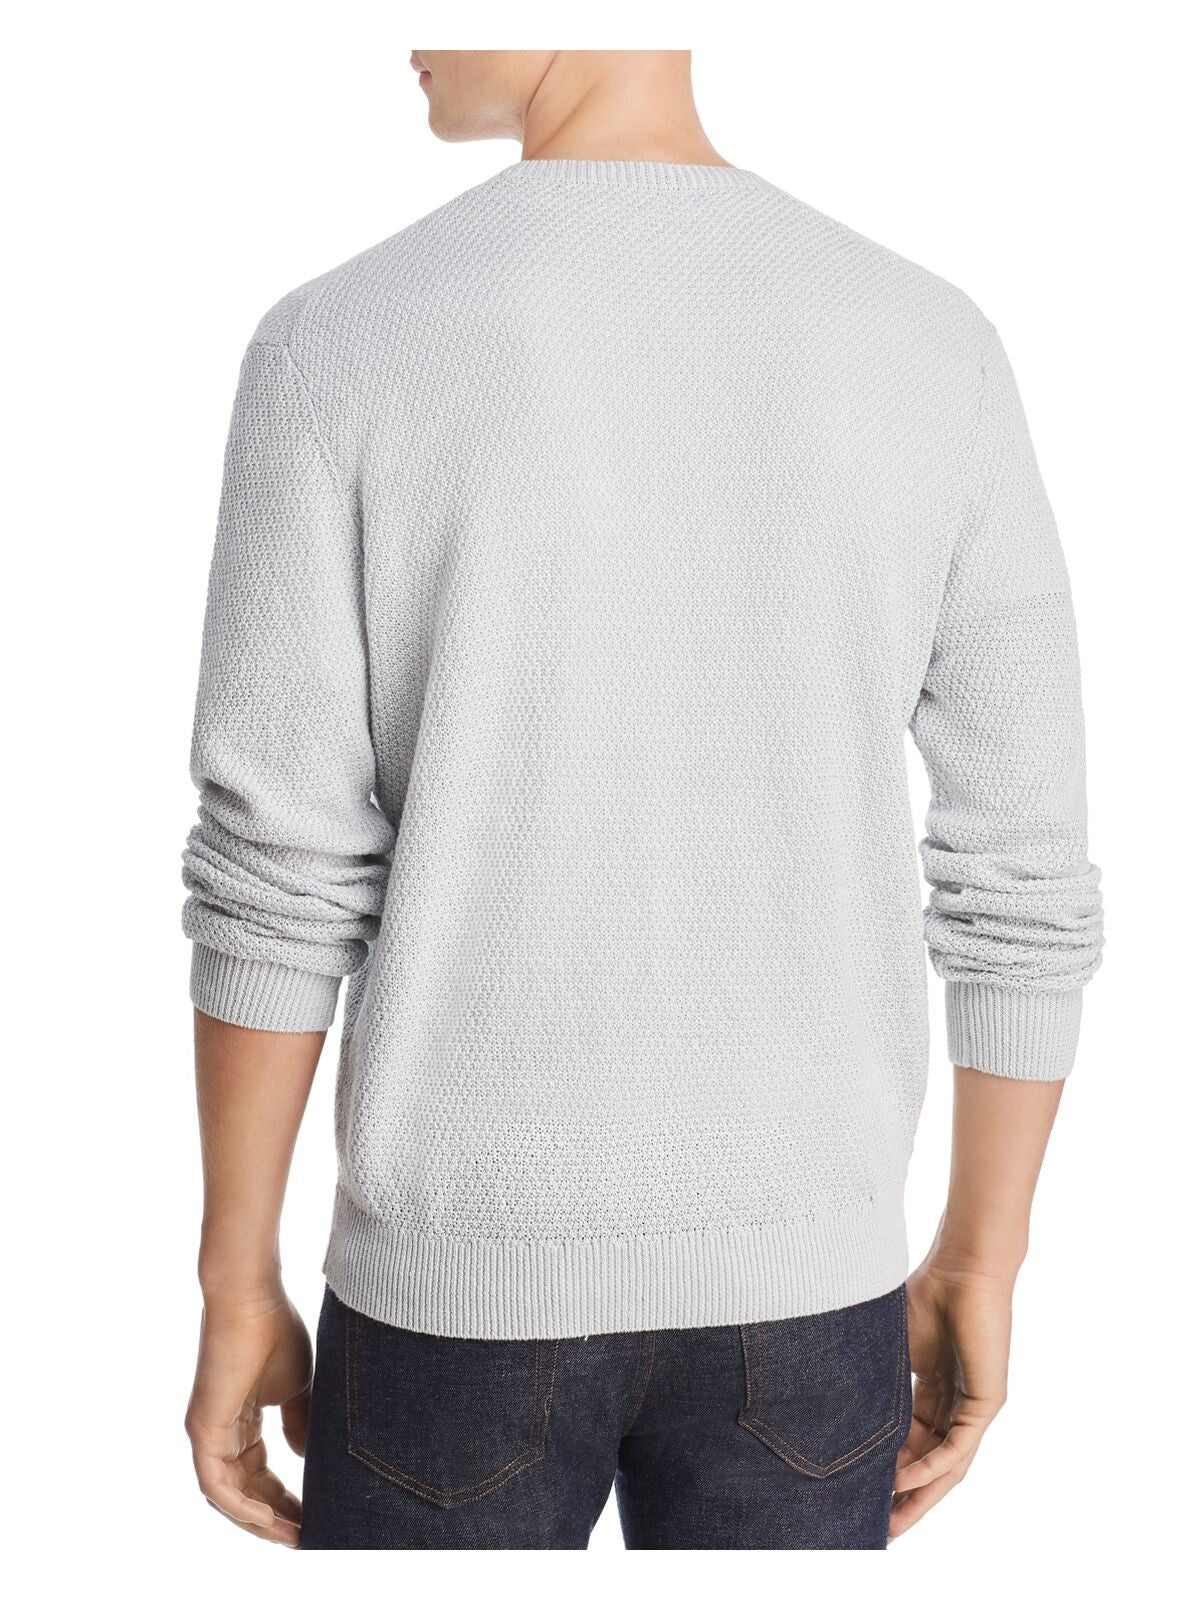 THE MENS STORE Mens Gray Crew Neck Pullover Sweater M